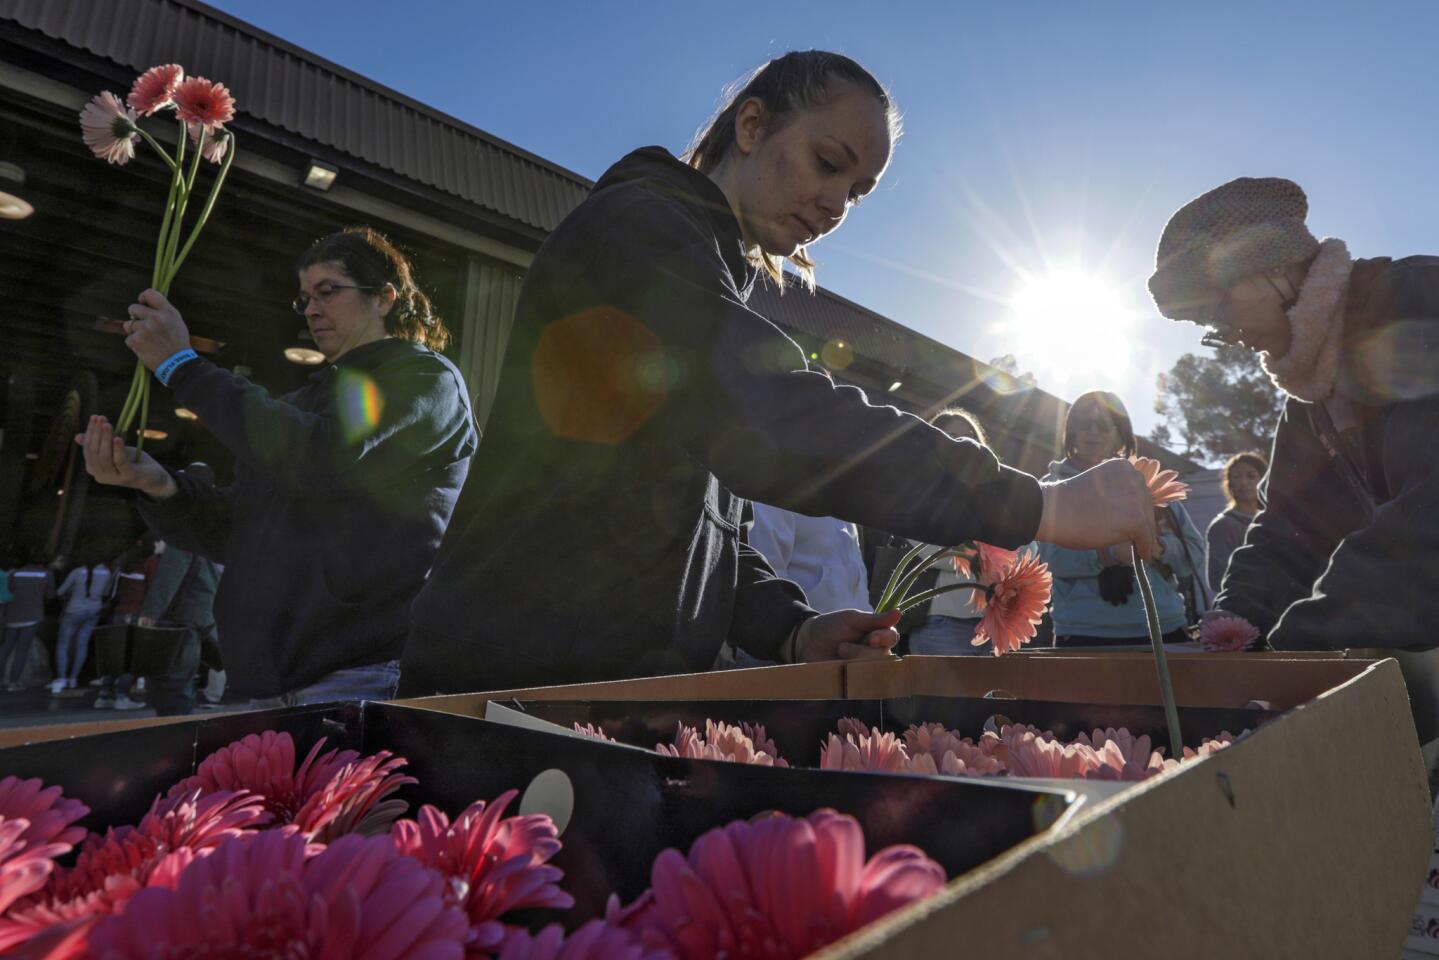 Volunteers scramble to put finishing touches on Rose Parade floats